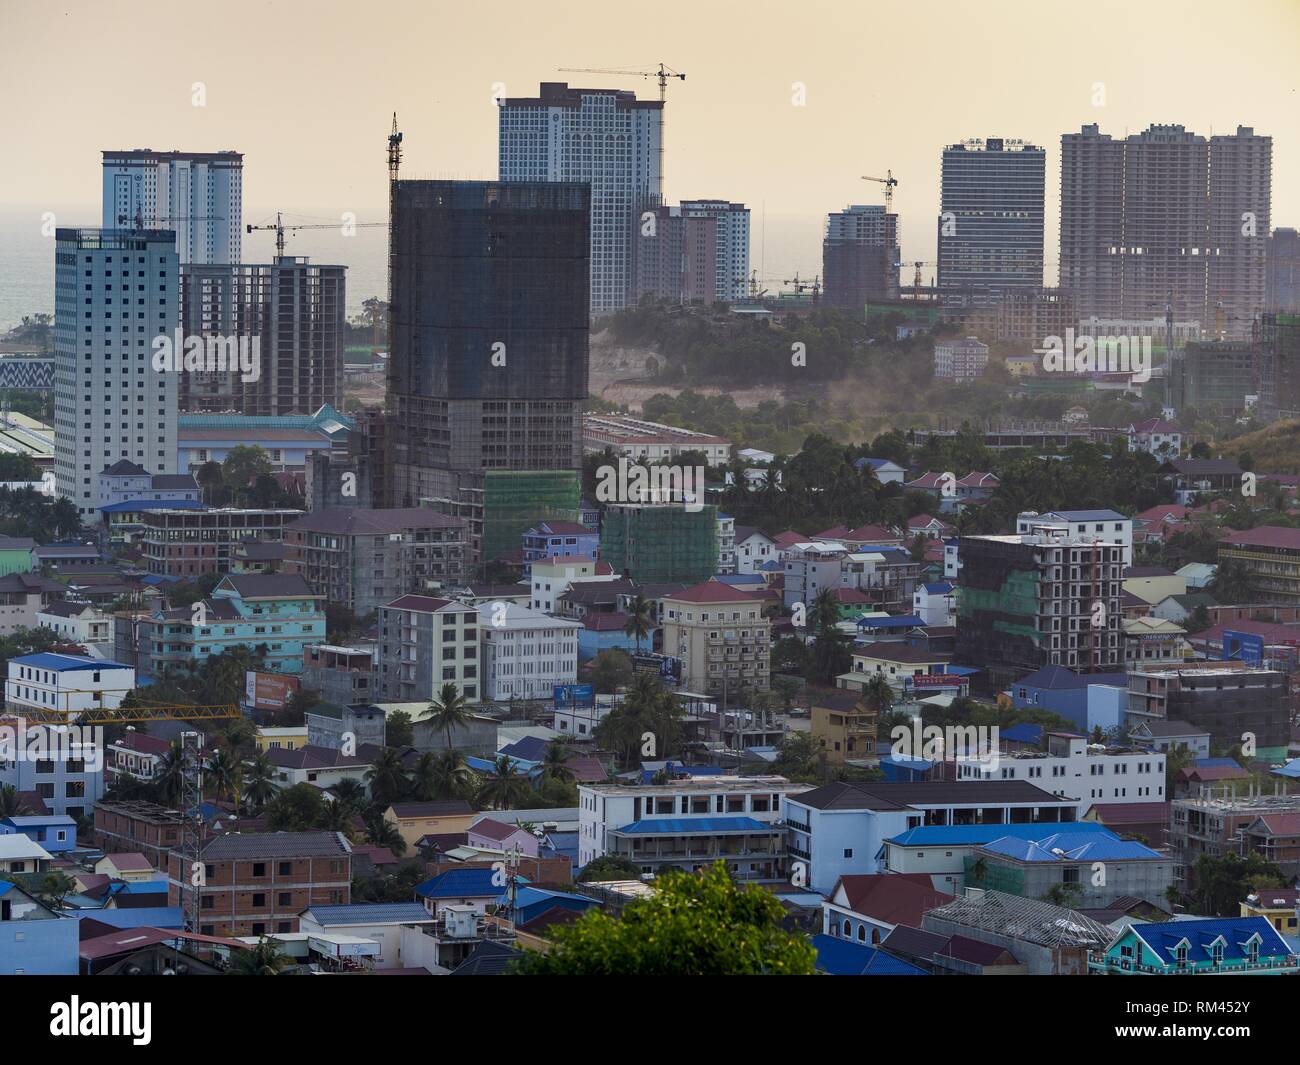 Sihanoukville, Preah Sihanouk, Cambodia. 13th Feb, 2019. Casinos under construction tower over the old section of Sihanoukville. There are about 80 Chinese casinos and resort hotels open in Sihanoukville and dozens more under construction. The casinos are changing the city, once a sleepy port on Southeast Asia's ''backpacker trail'' into a booming city. The change is coming with a cost though. Many Cambodian residents of Sihanoukville have lost their homes to make way for the casinos and the jobs are going to Chinese workers, brought in to build casinos and work in the casinos. (Credit I Stock Photo